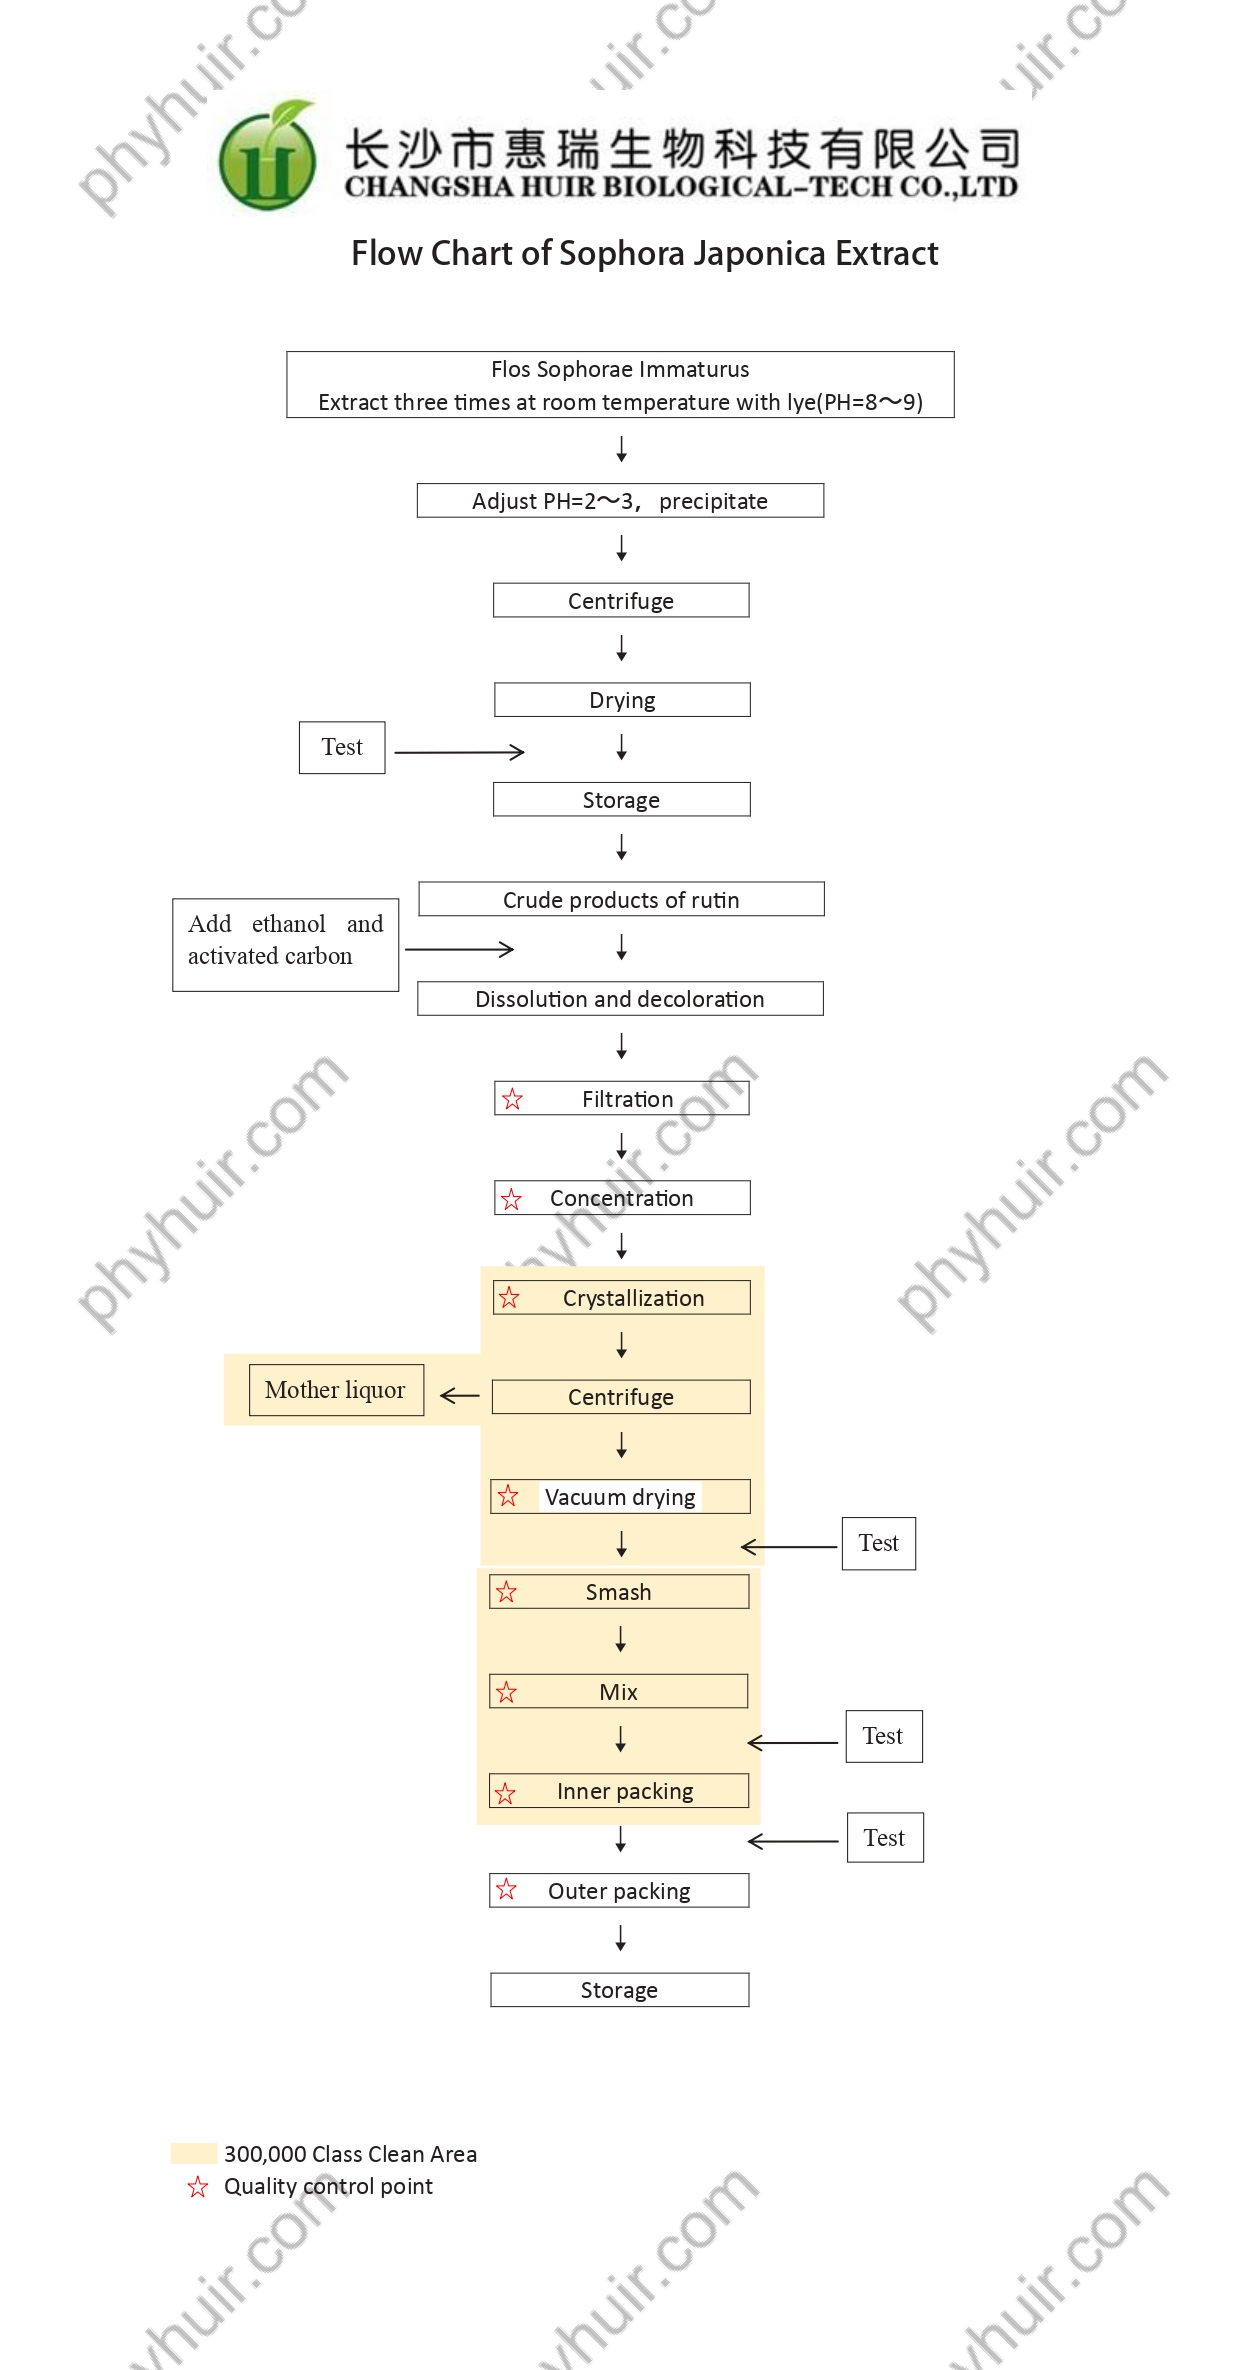 Flow chart of Sophora Japonica Extract-Quercetin powder-1_watermark (3)_page-0001.jpg